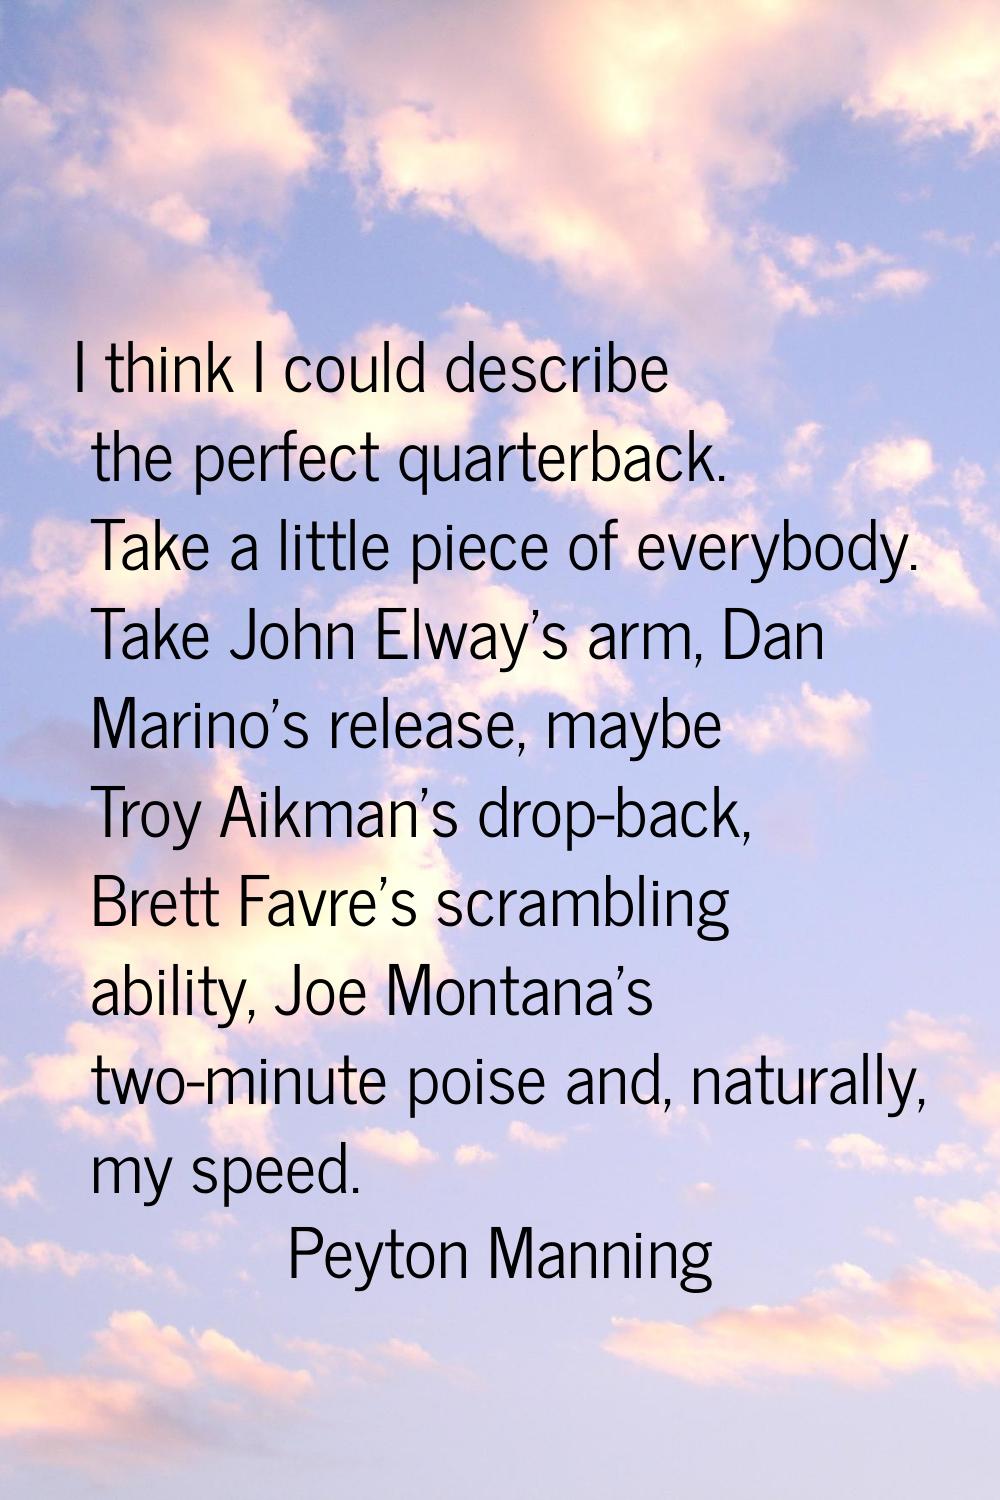 I think I could describe the perfect quarterback. Take a little piece of everybody. Take John Elway